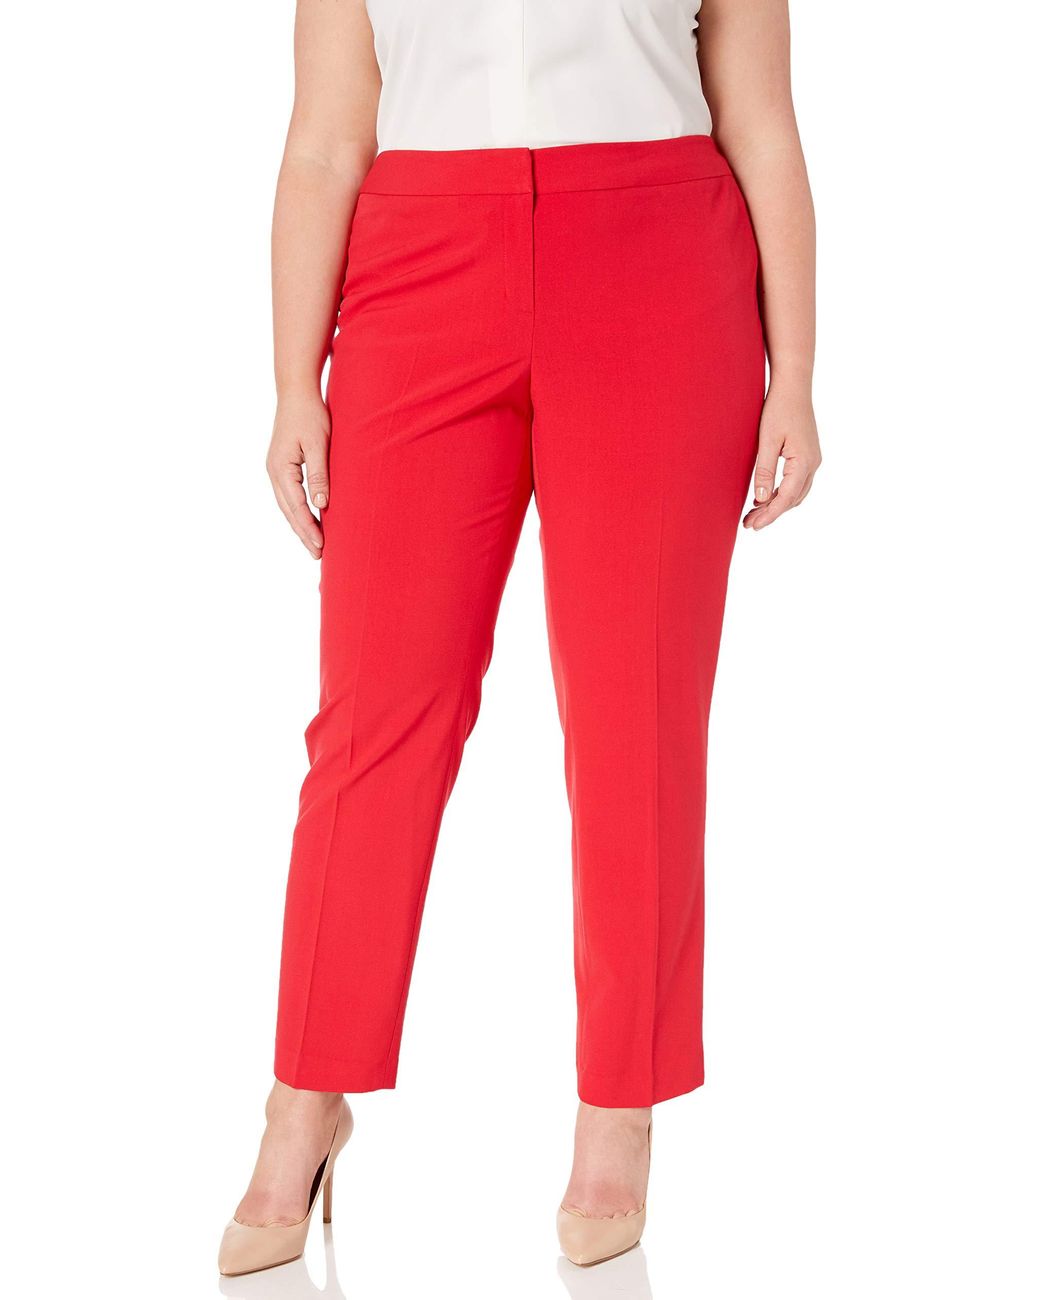 Nine West Strech Skinny Pant in Cherry (Red) - Lyst